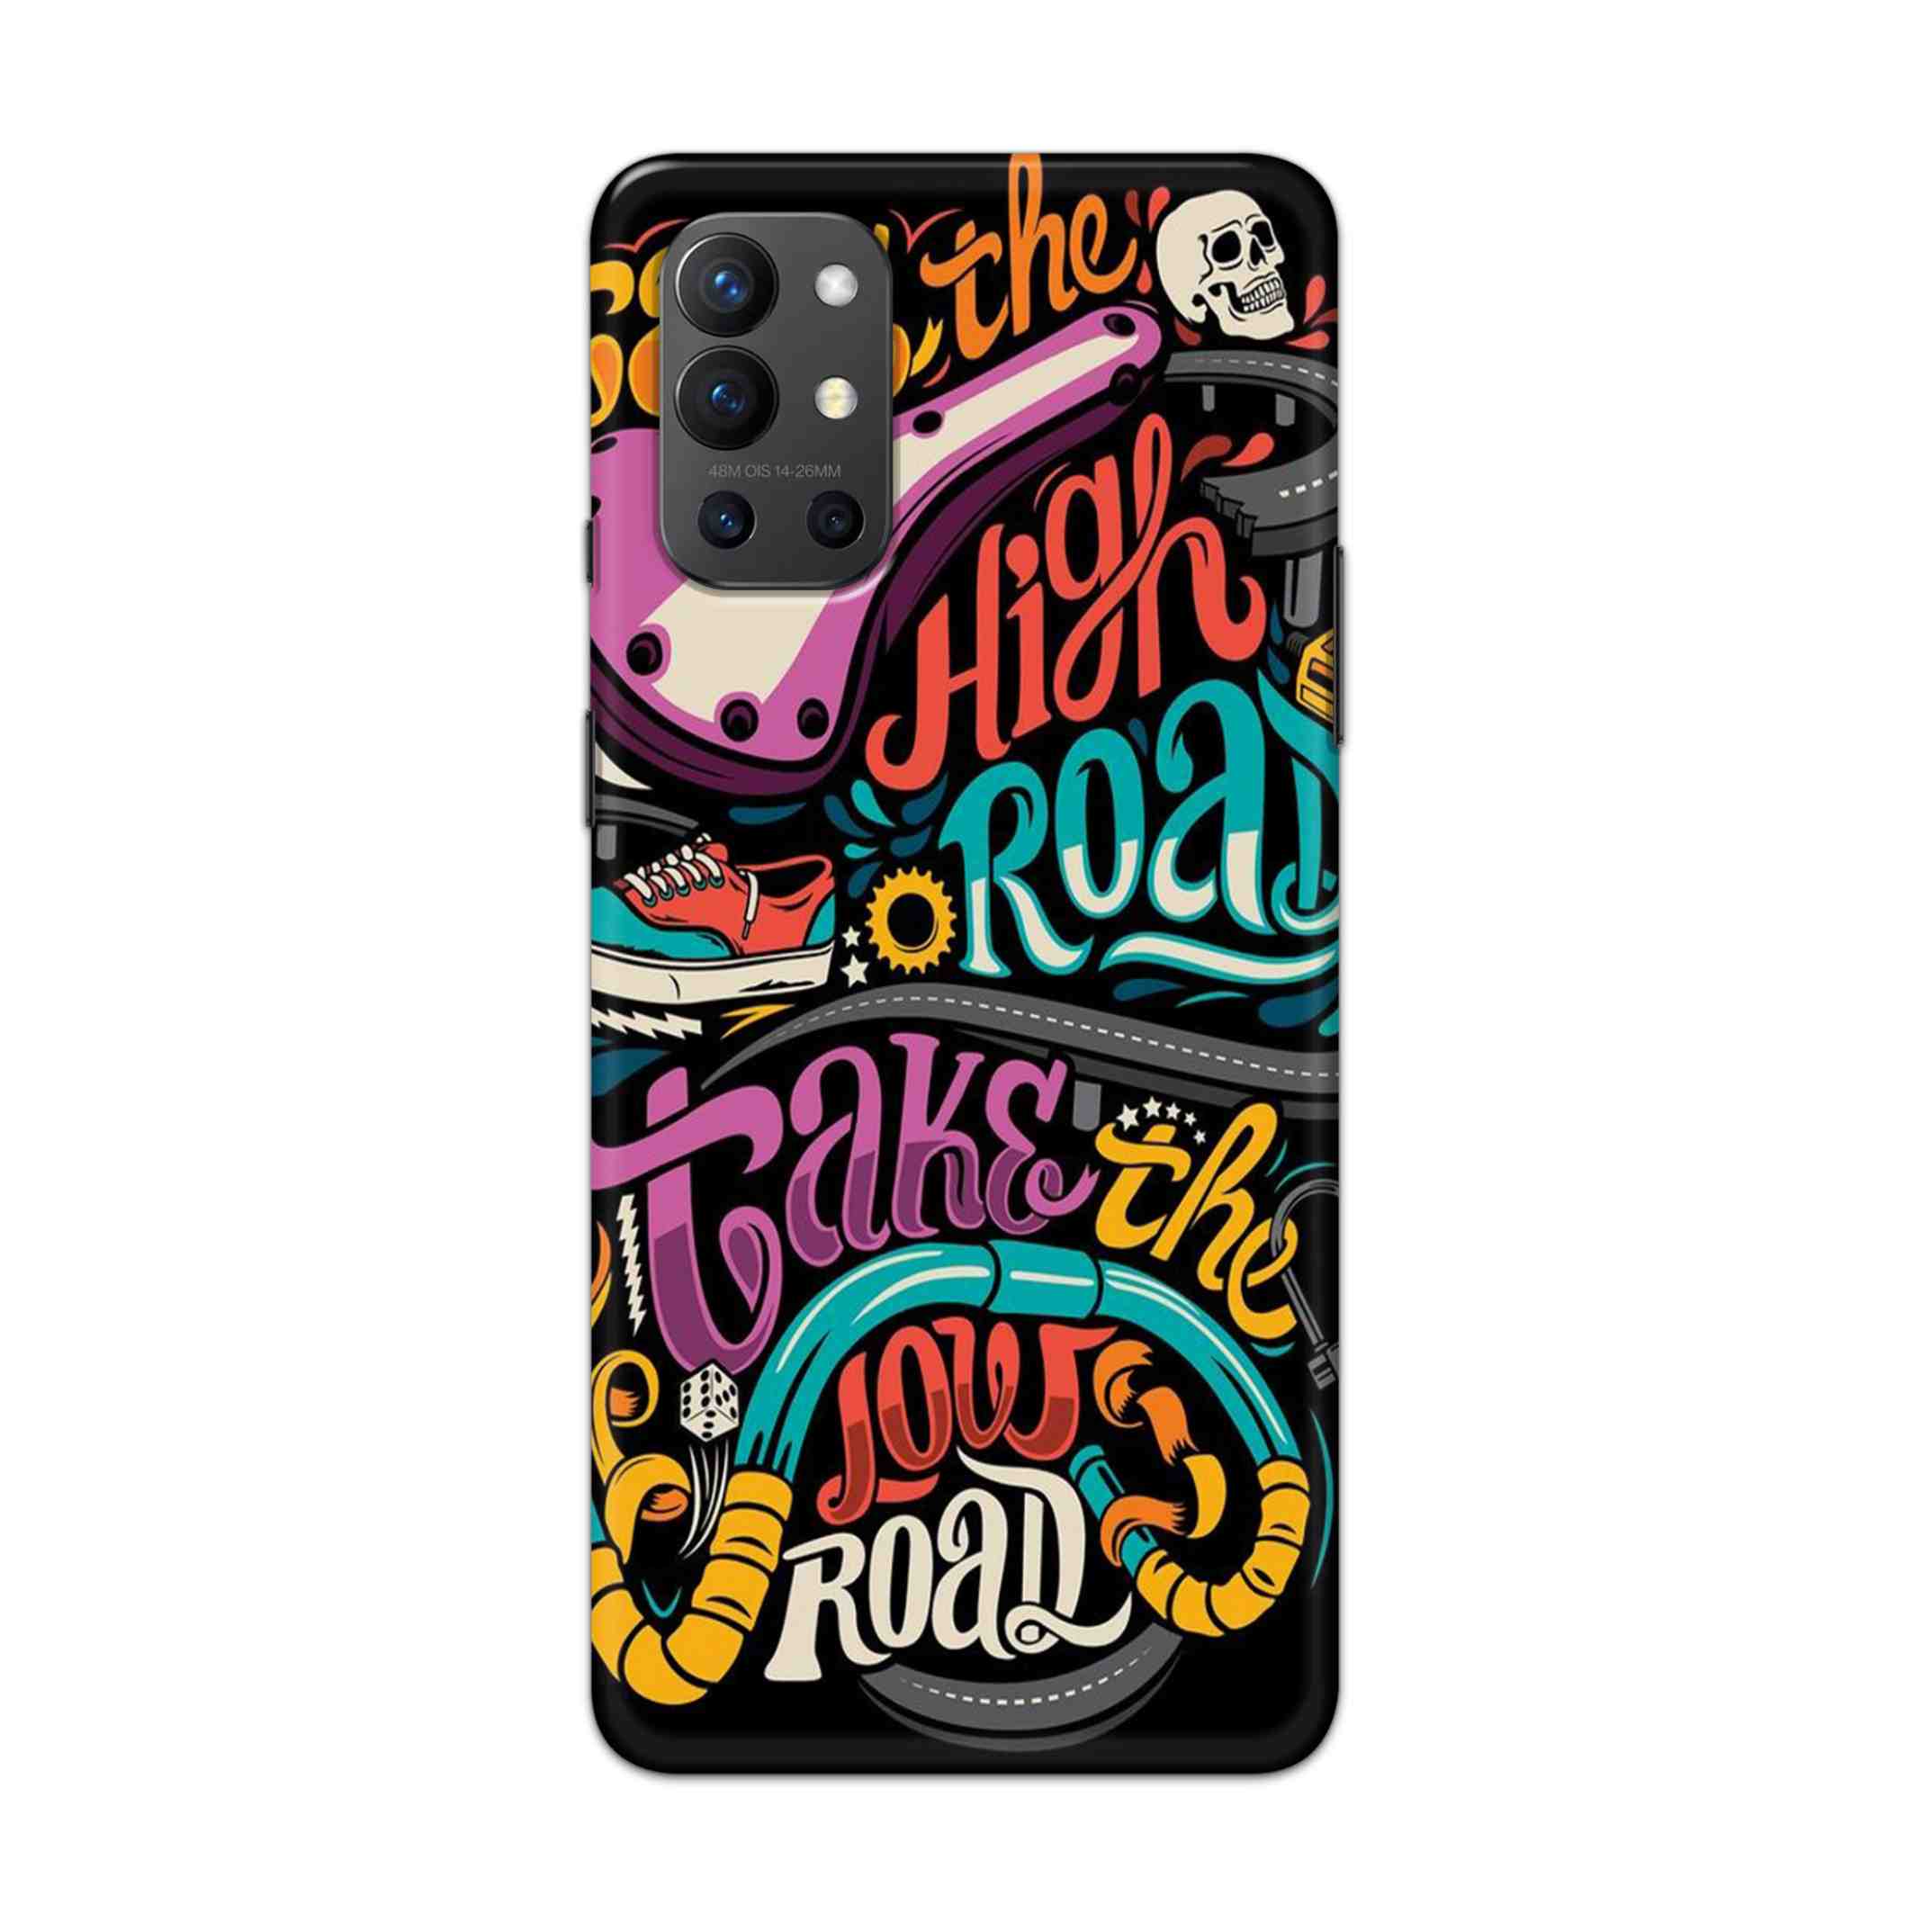 Buy Take The High Road Hard Back Mobile Phone Case Cover For OnePlus 9R / 8T Online